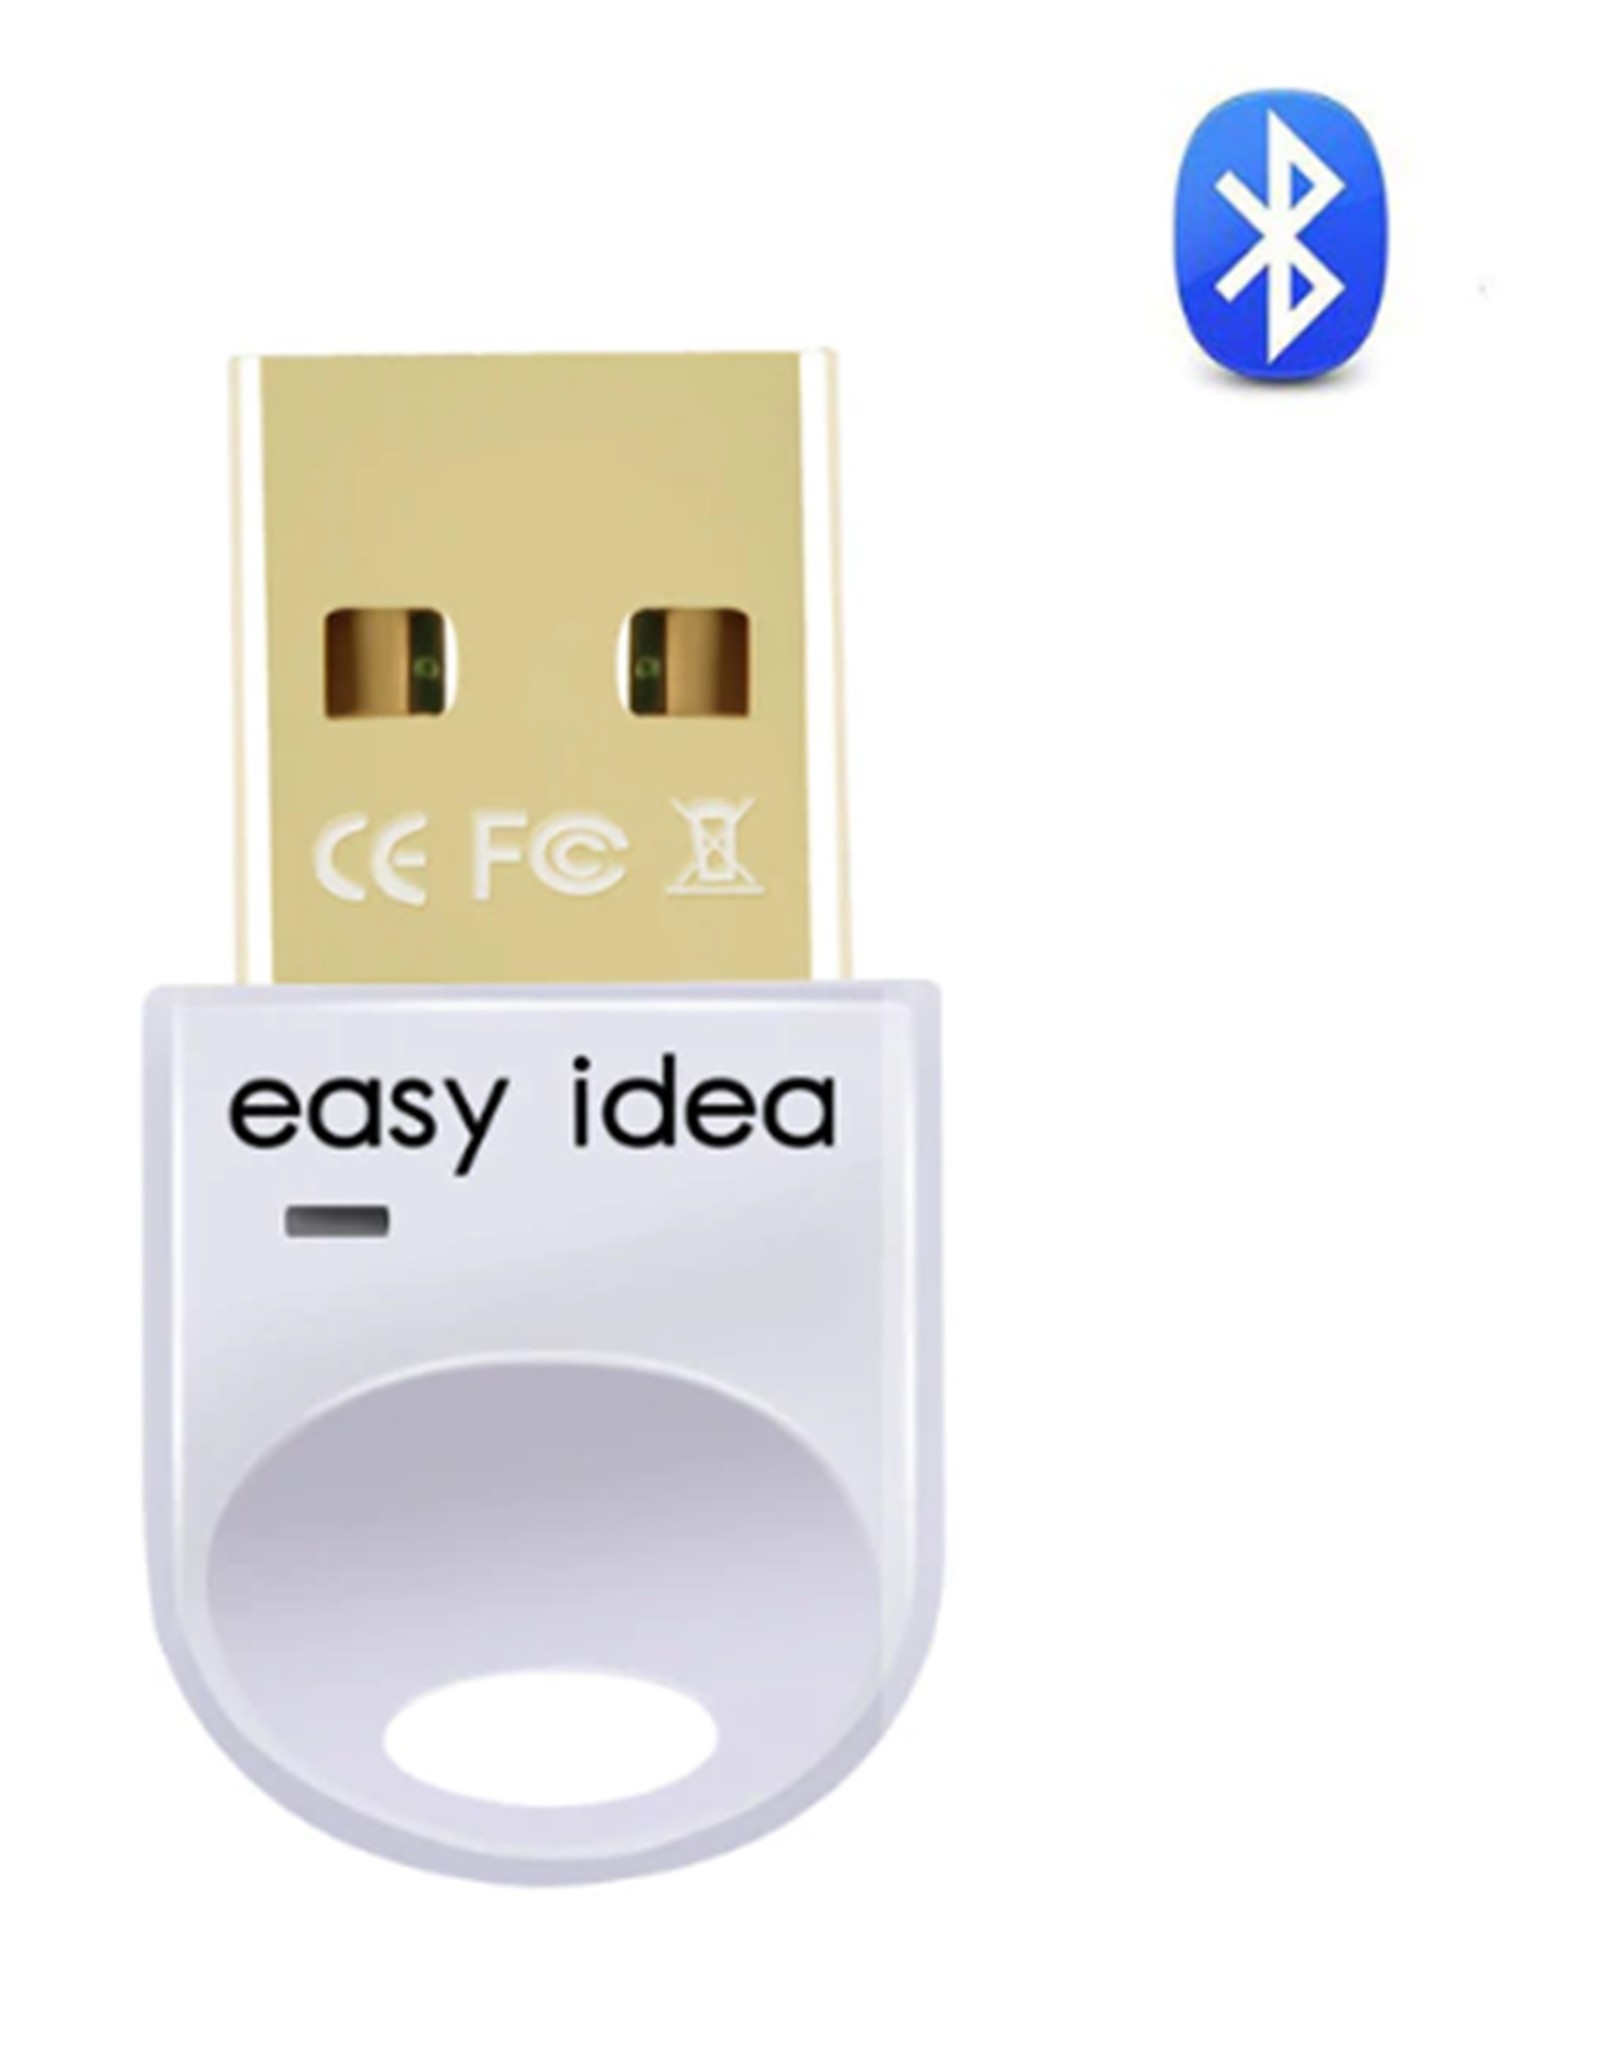 dongle adapter